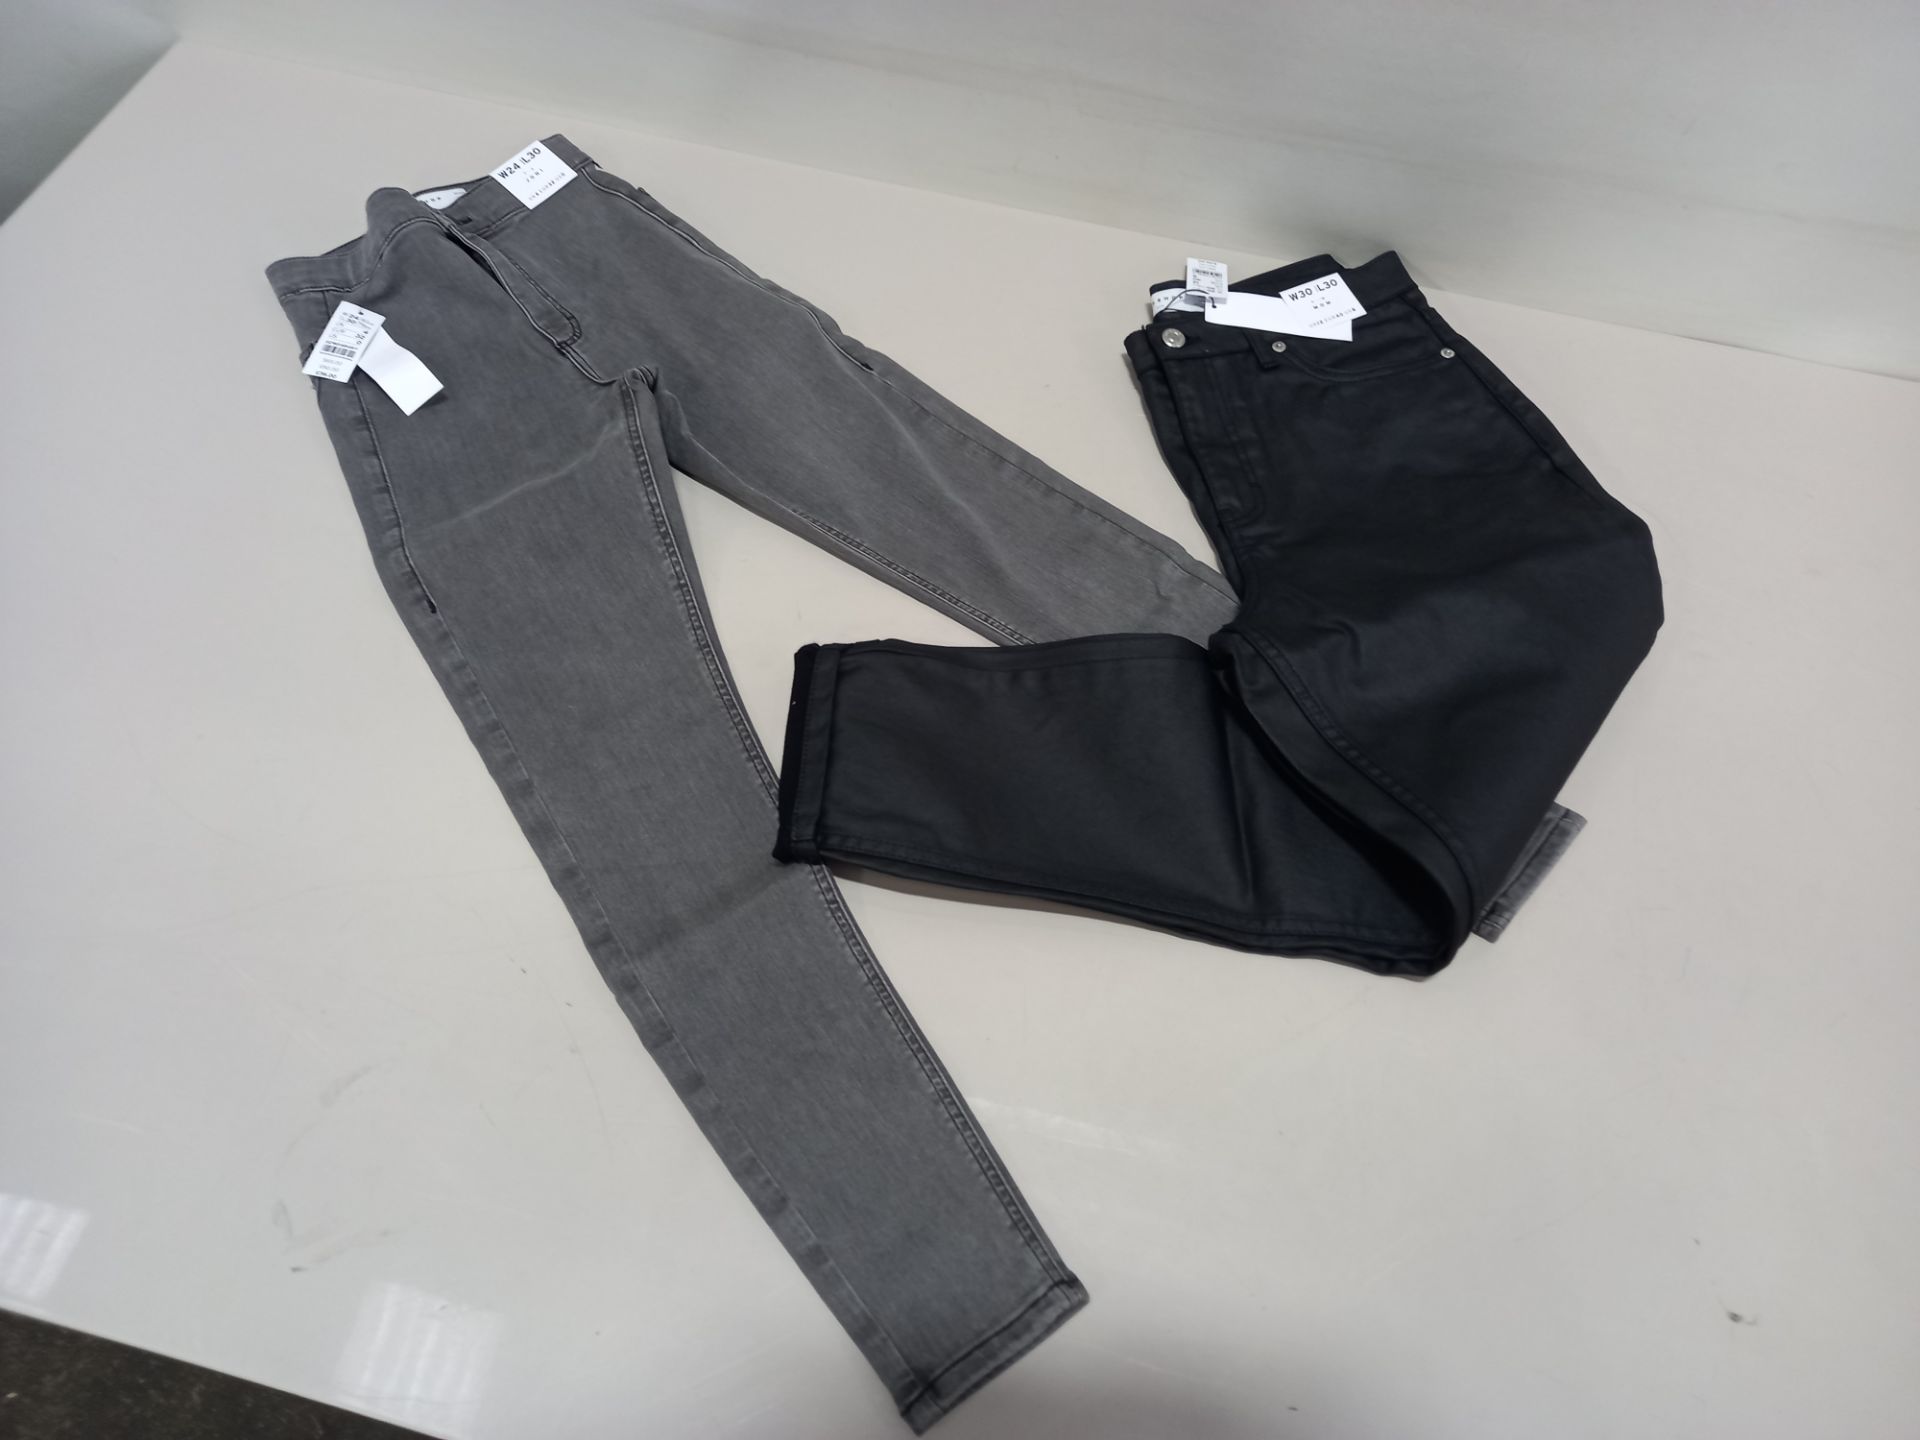 10 X PIECE TOPSHOP JEAN LOT CONTAINING 5 X JONI GREY DENIM JEANS UK SIZE 4 RRP £36.00 AND 5 X MOM